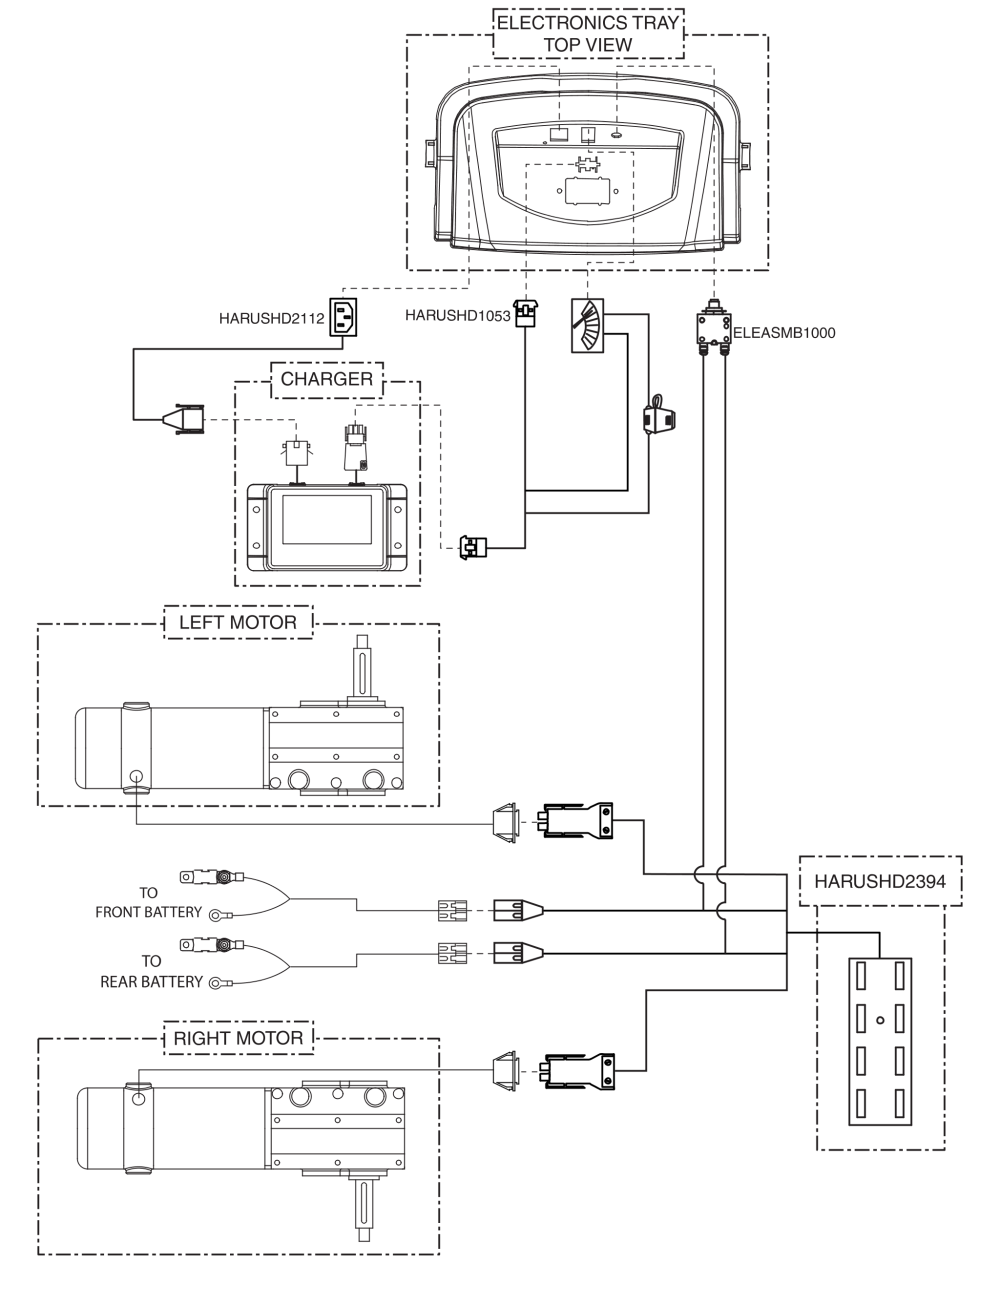 Electrical System Diagram, Vsi, Jazzy Select 14 parts diagram